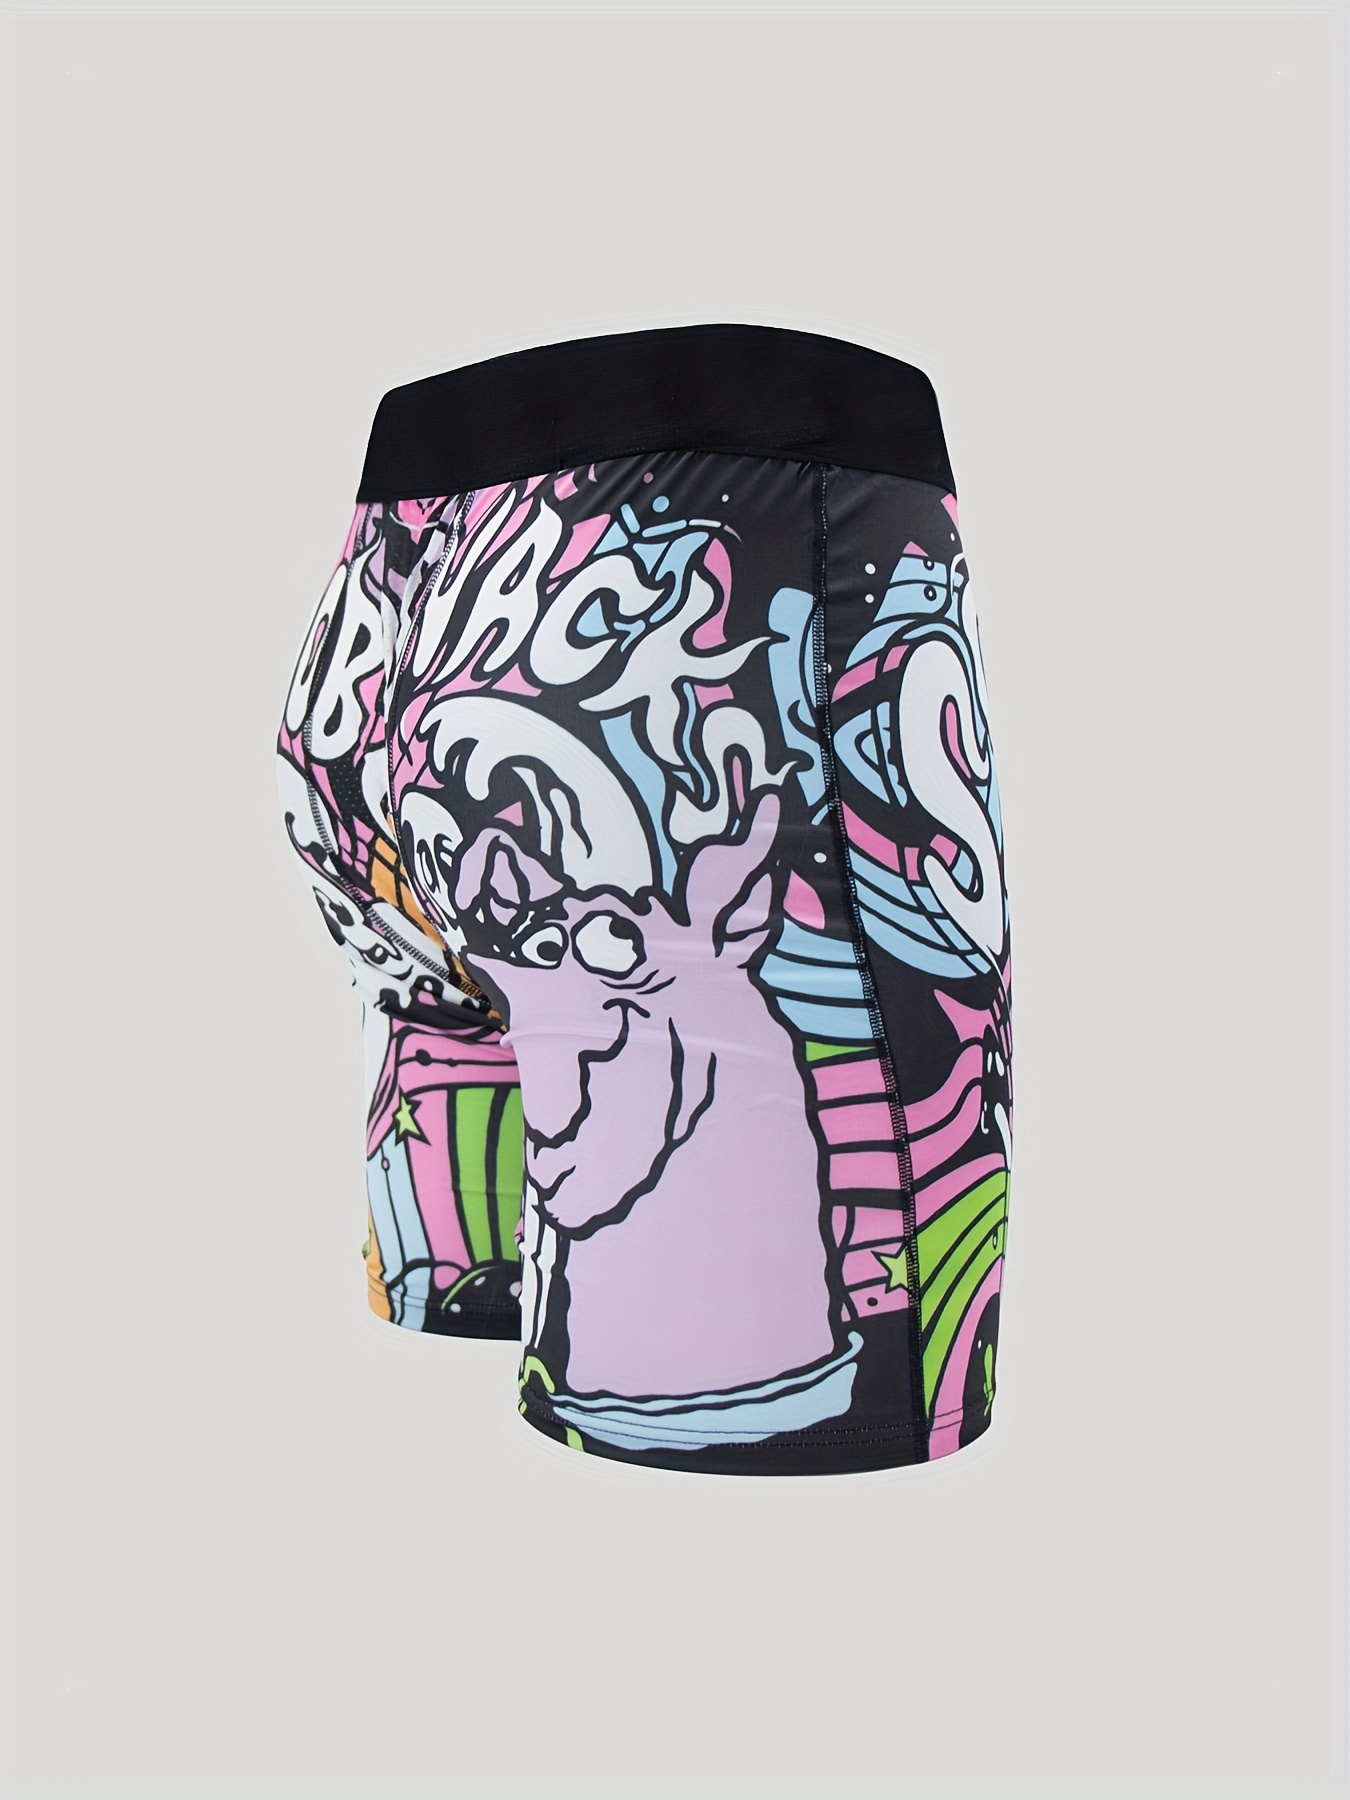 Rick and Morty Character Collage Boxer Briefs